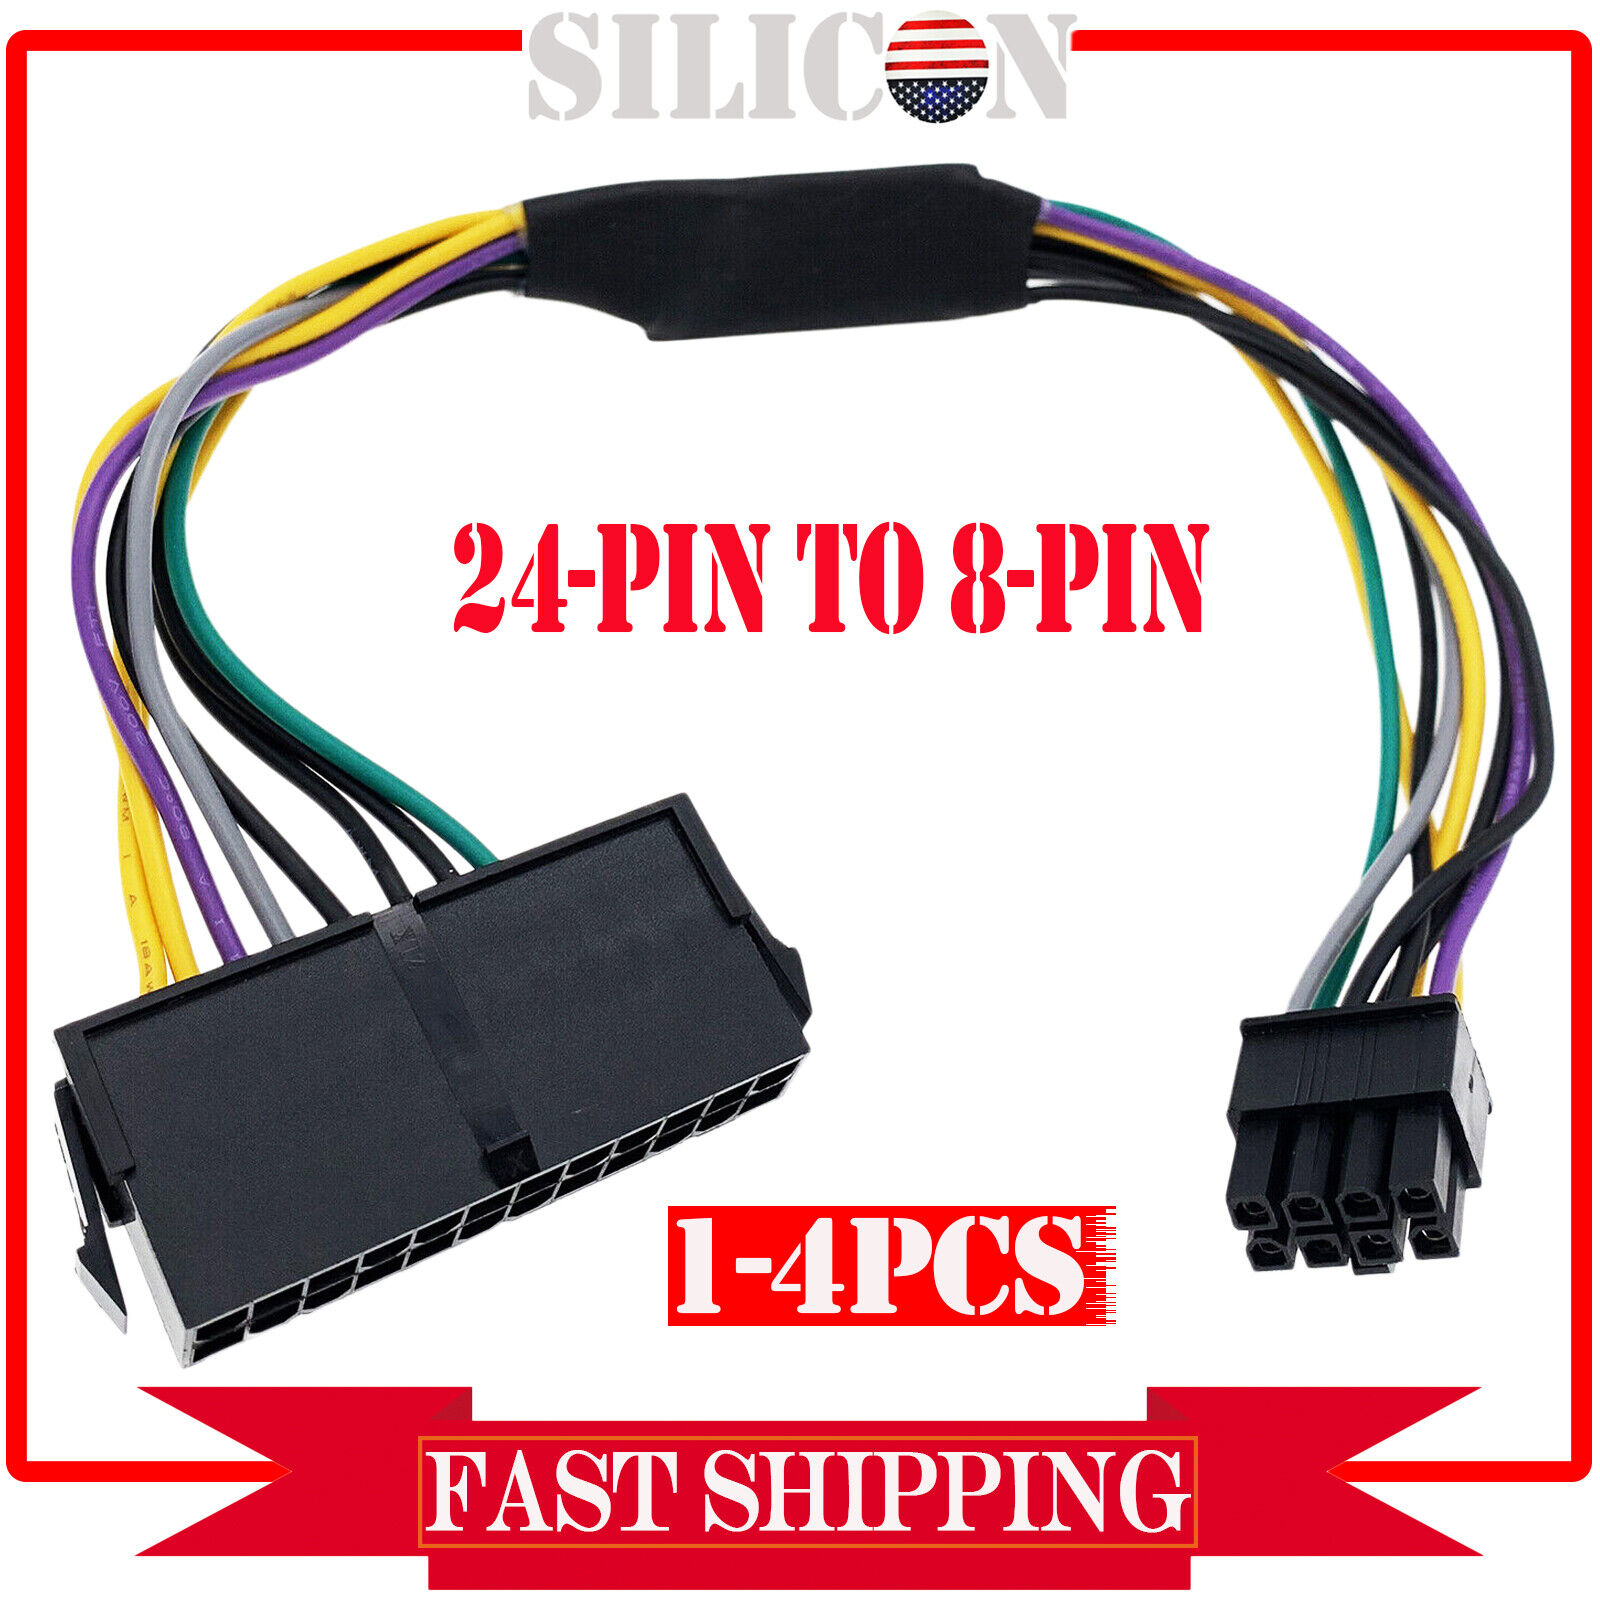 24-Pin to 8-Pin 18AWG ATX Power Supply Adapter Cable For Dell Optiplex Computers